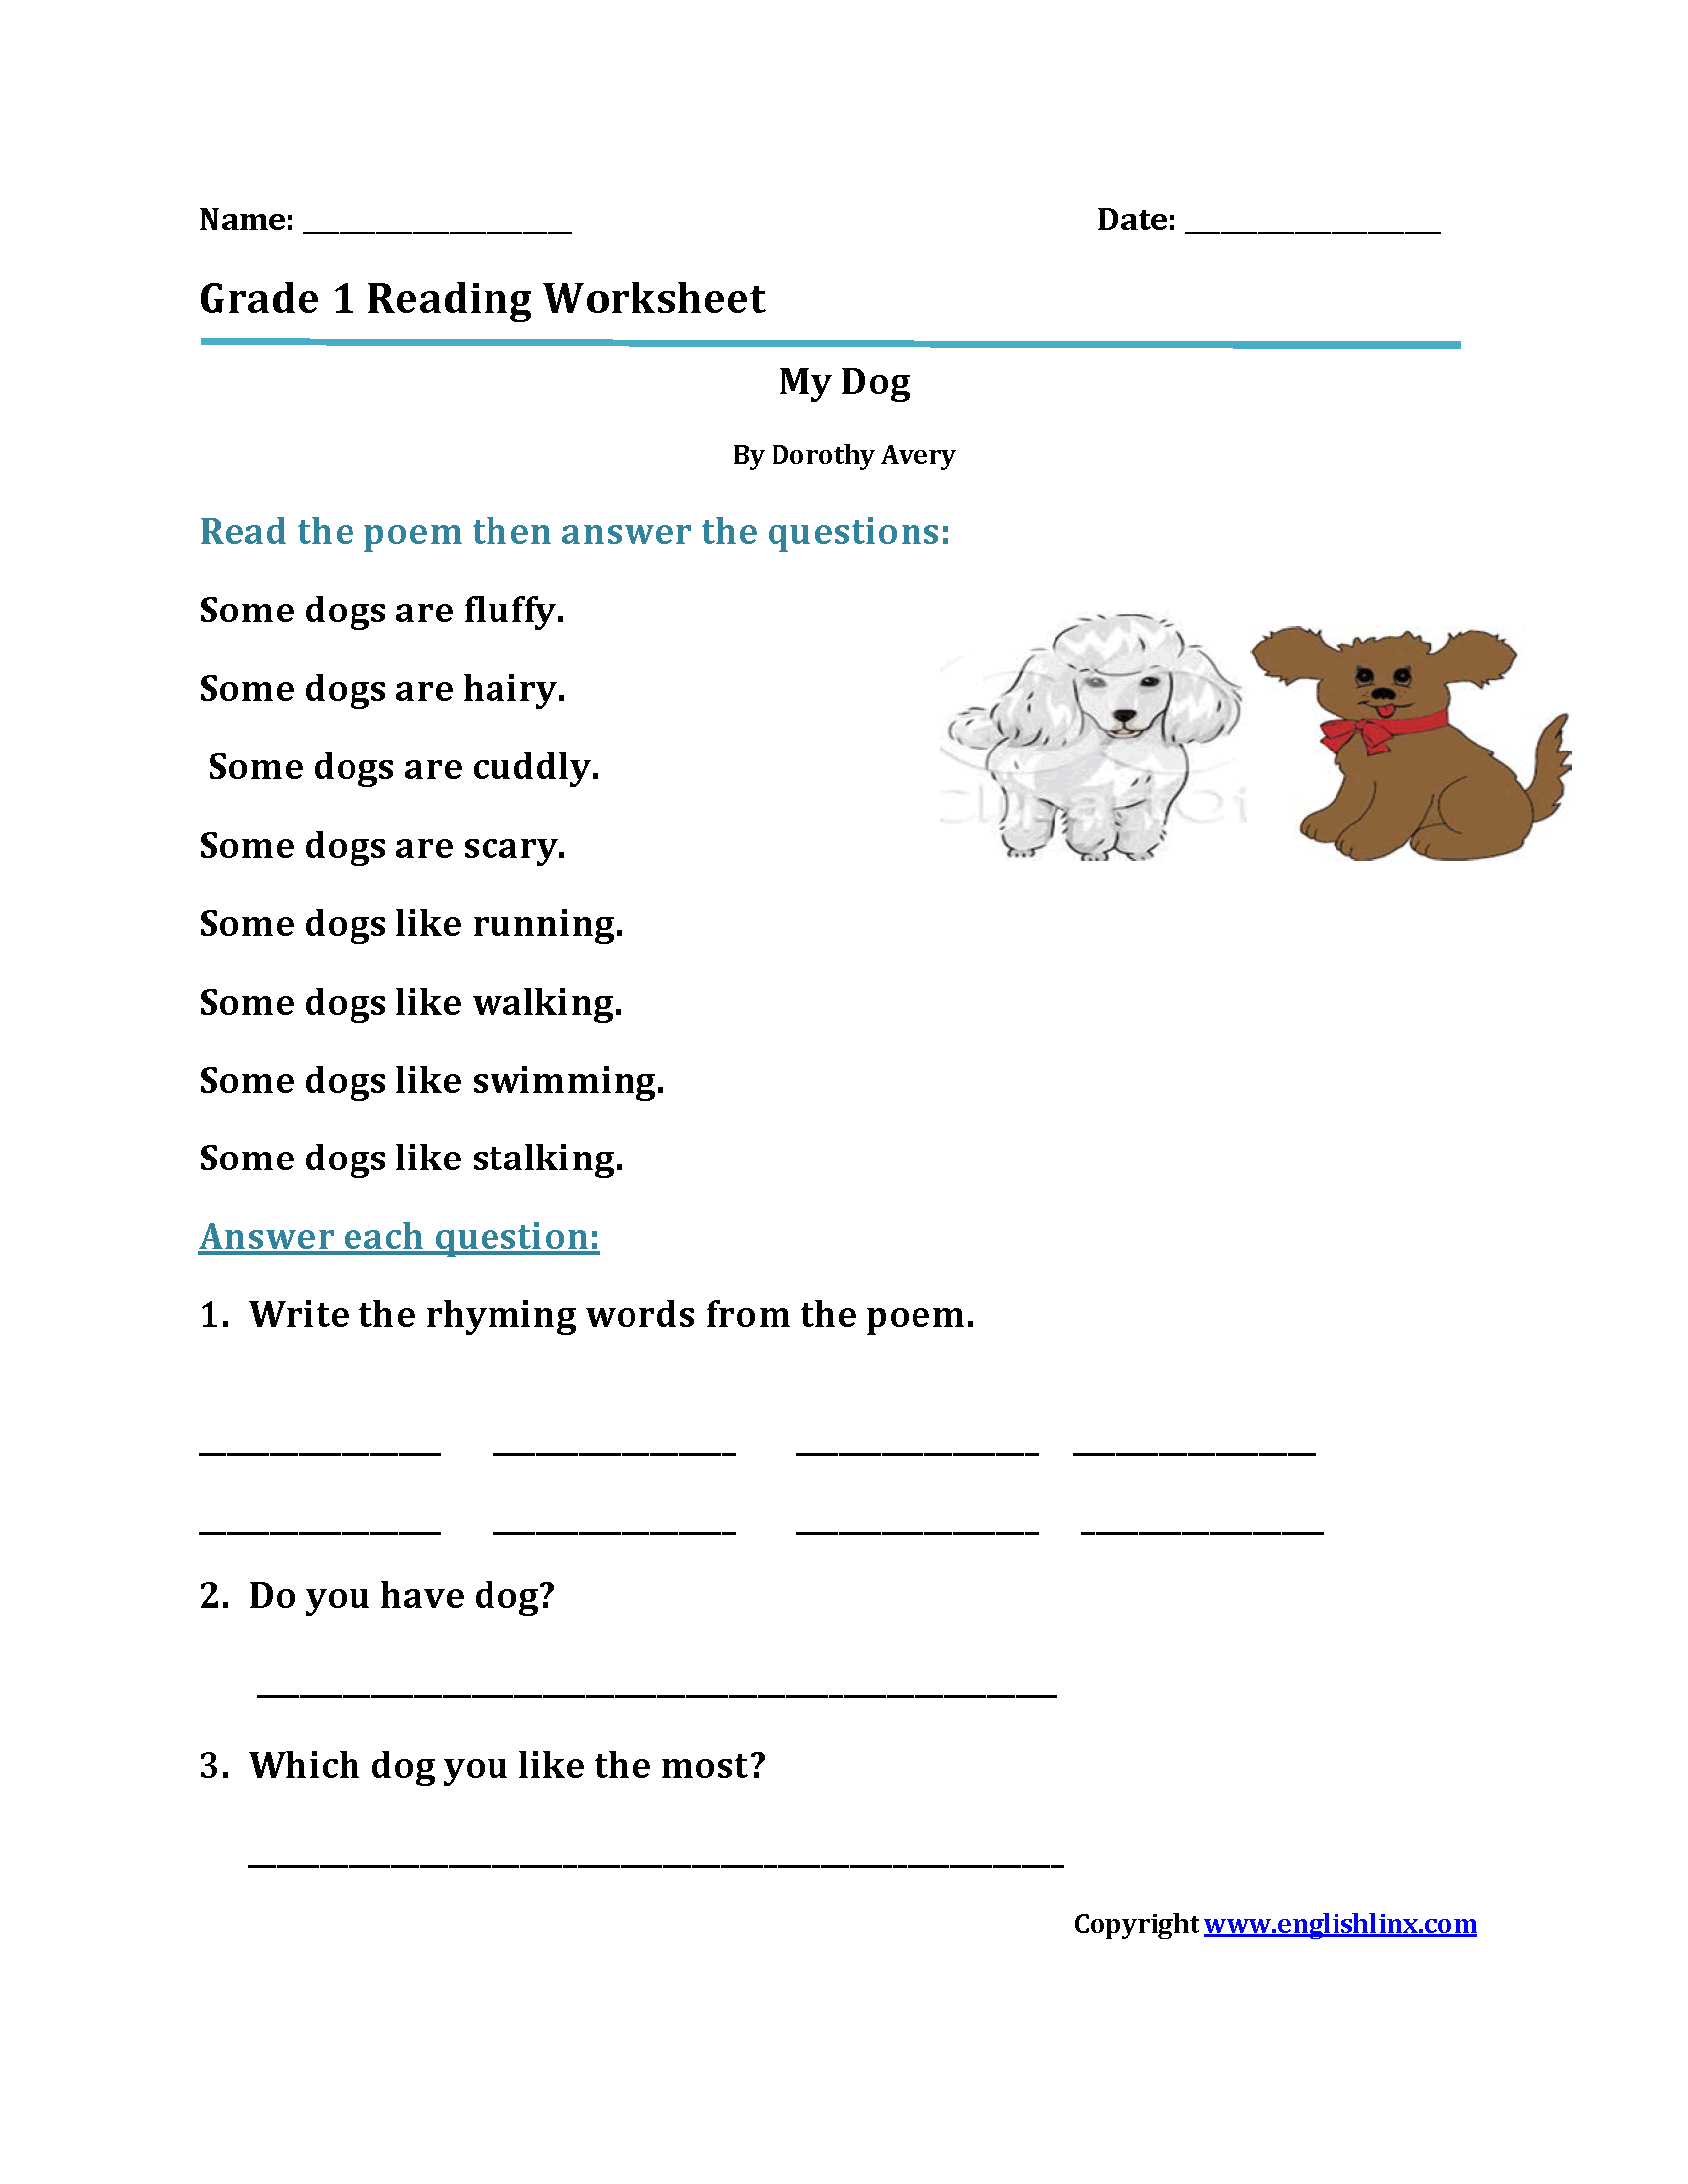 My Dog First Grade Reading Worksheets